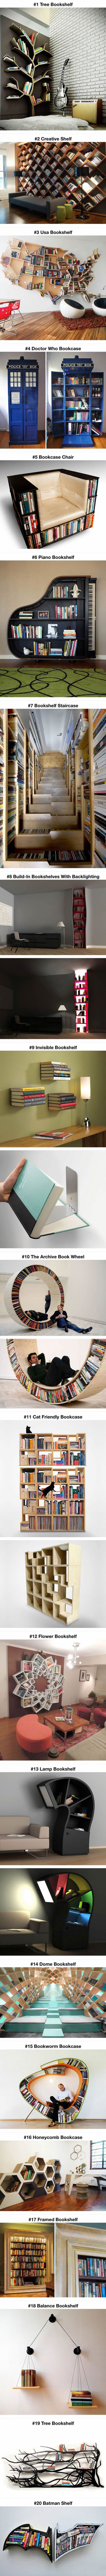 Probably The Most Creative Bookshelves Ever